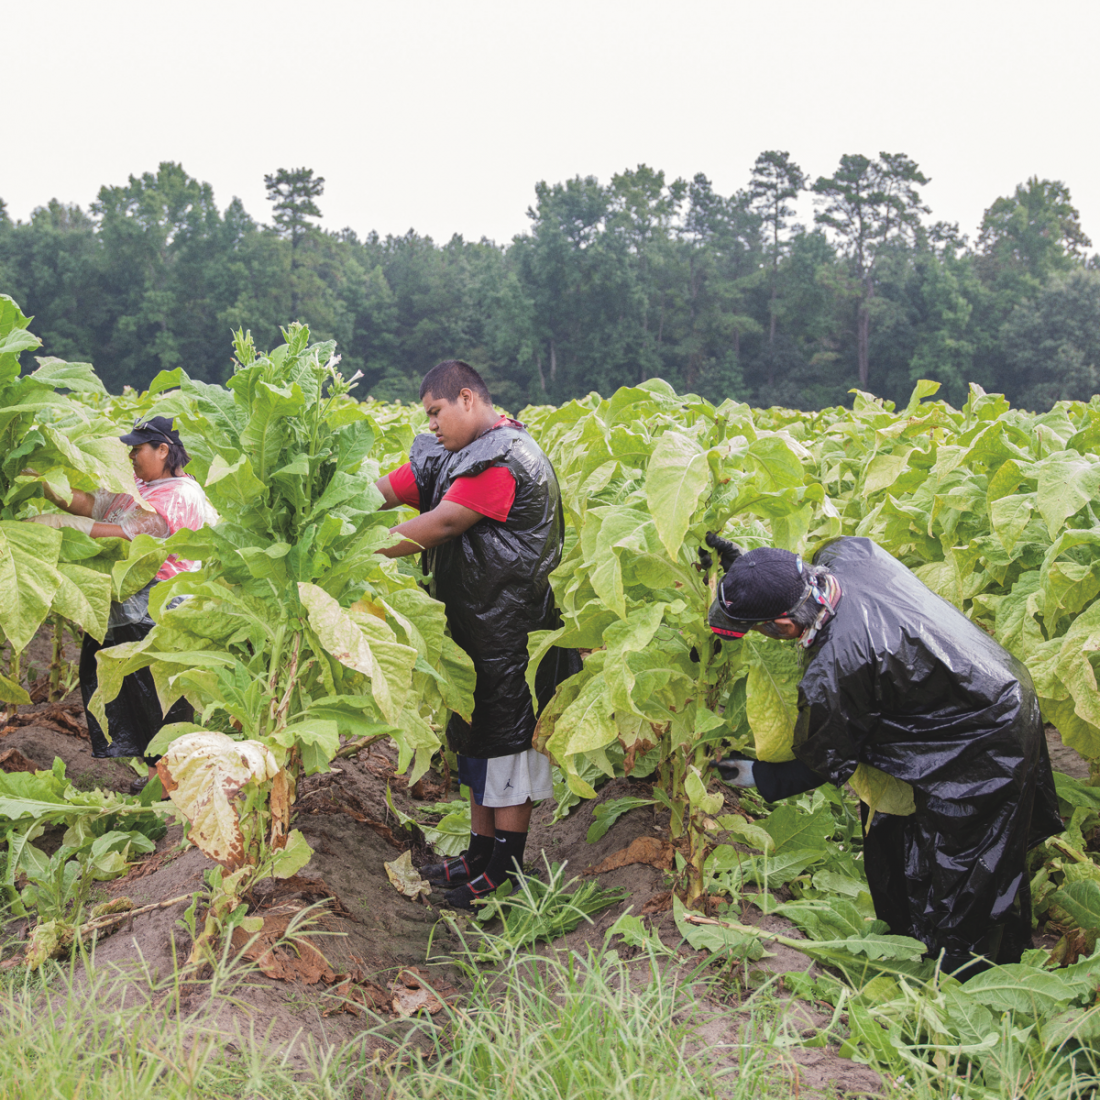 Goldsboro, NC, USA Miguel, a fourteen-year-old Mexican migrant worker, picking leaves in a tobacco field with his aunt and uncle. ? Rocco Rorandelli